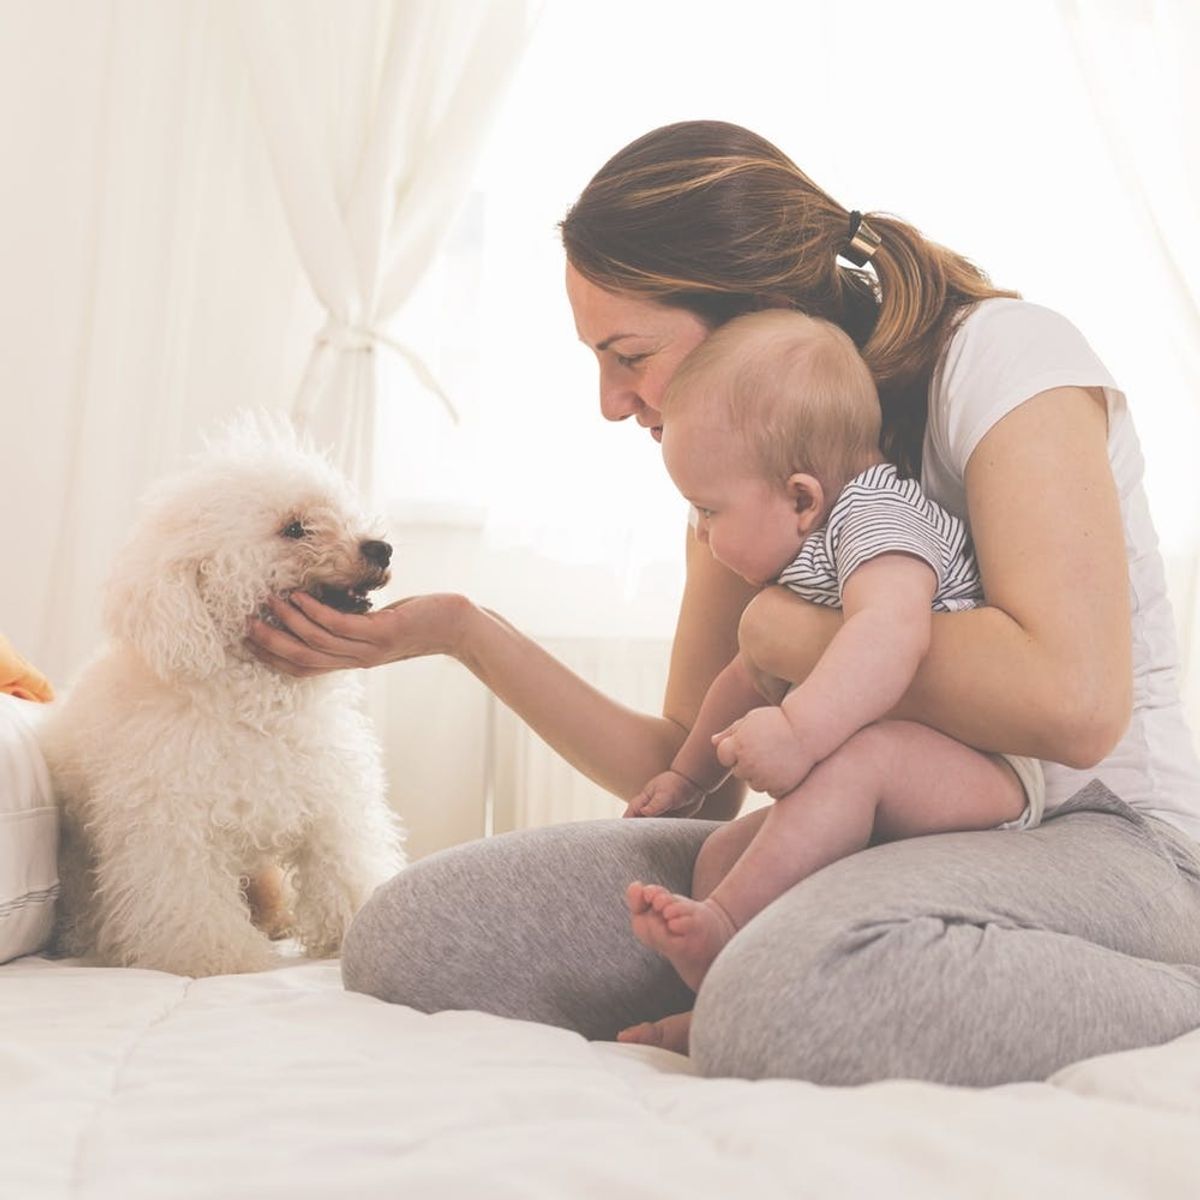 Having a Pet Could Make Your Baby Healthier